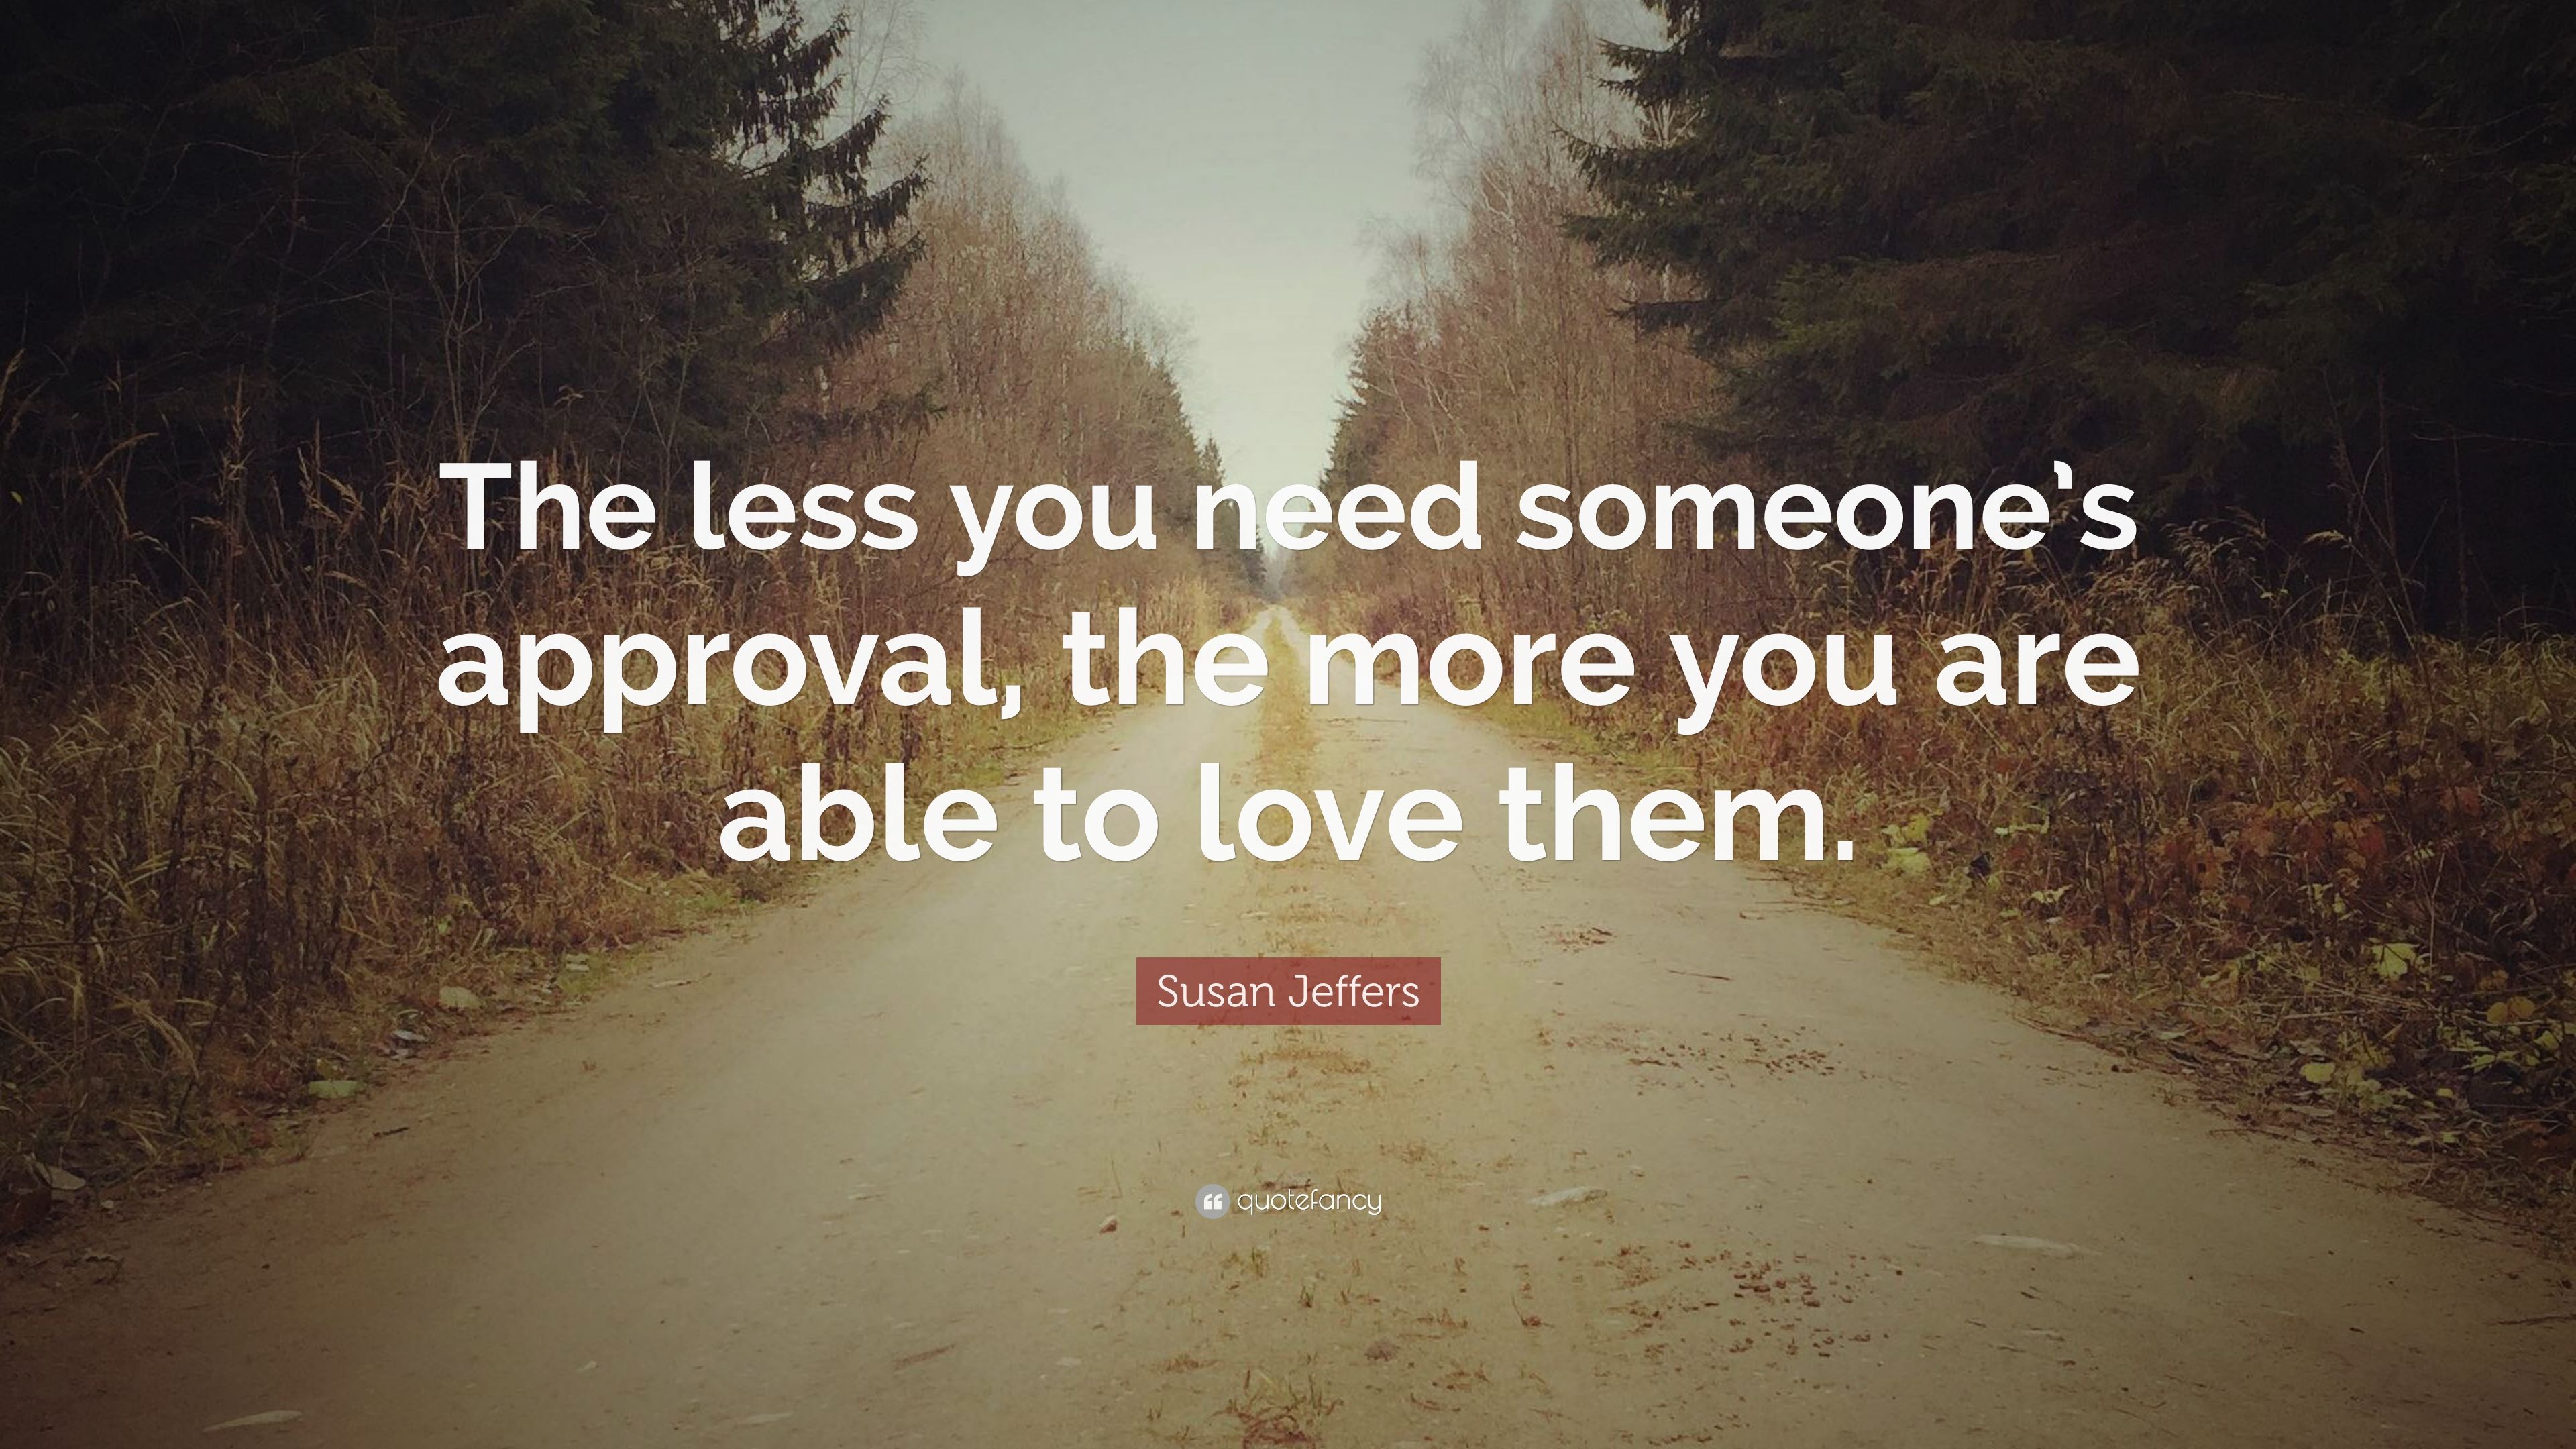 Susan Jeffers Quote “The less you need someone s approval the more you are